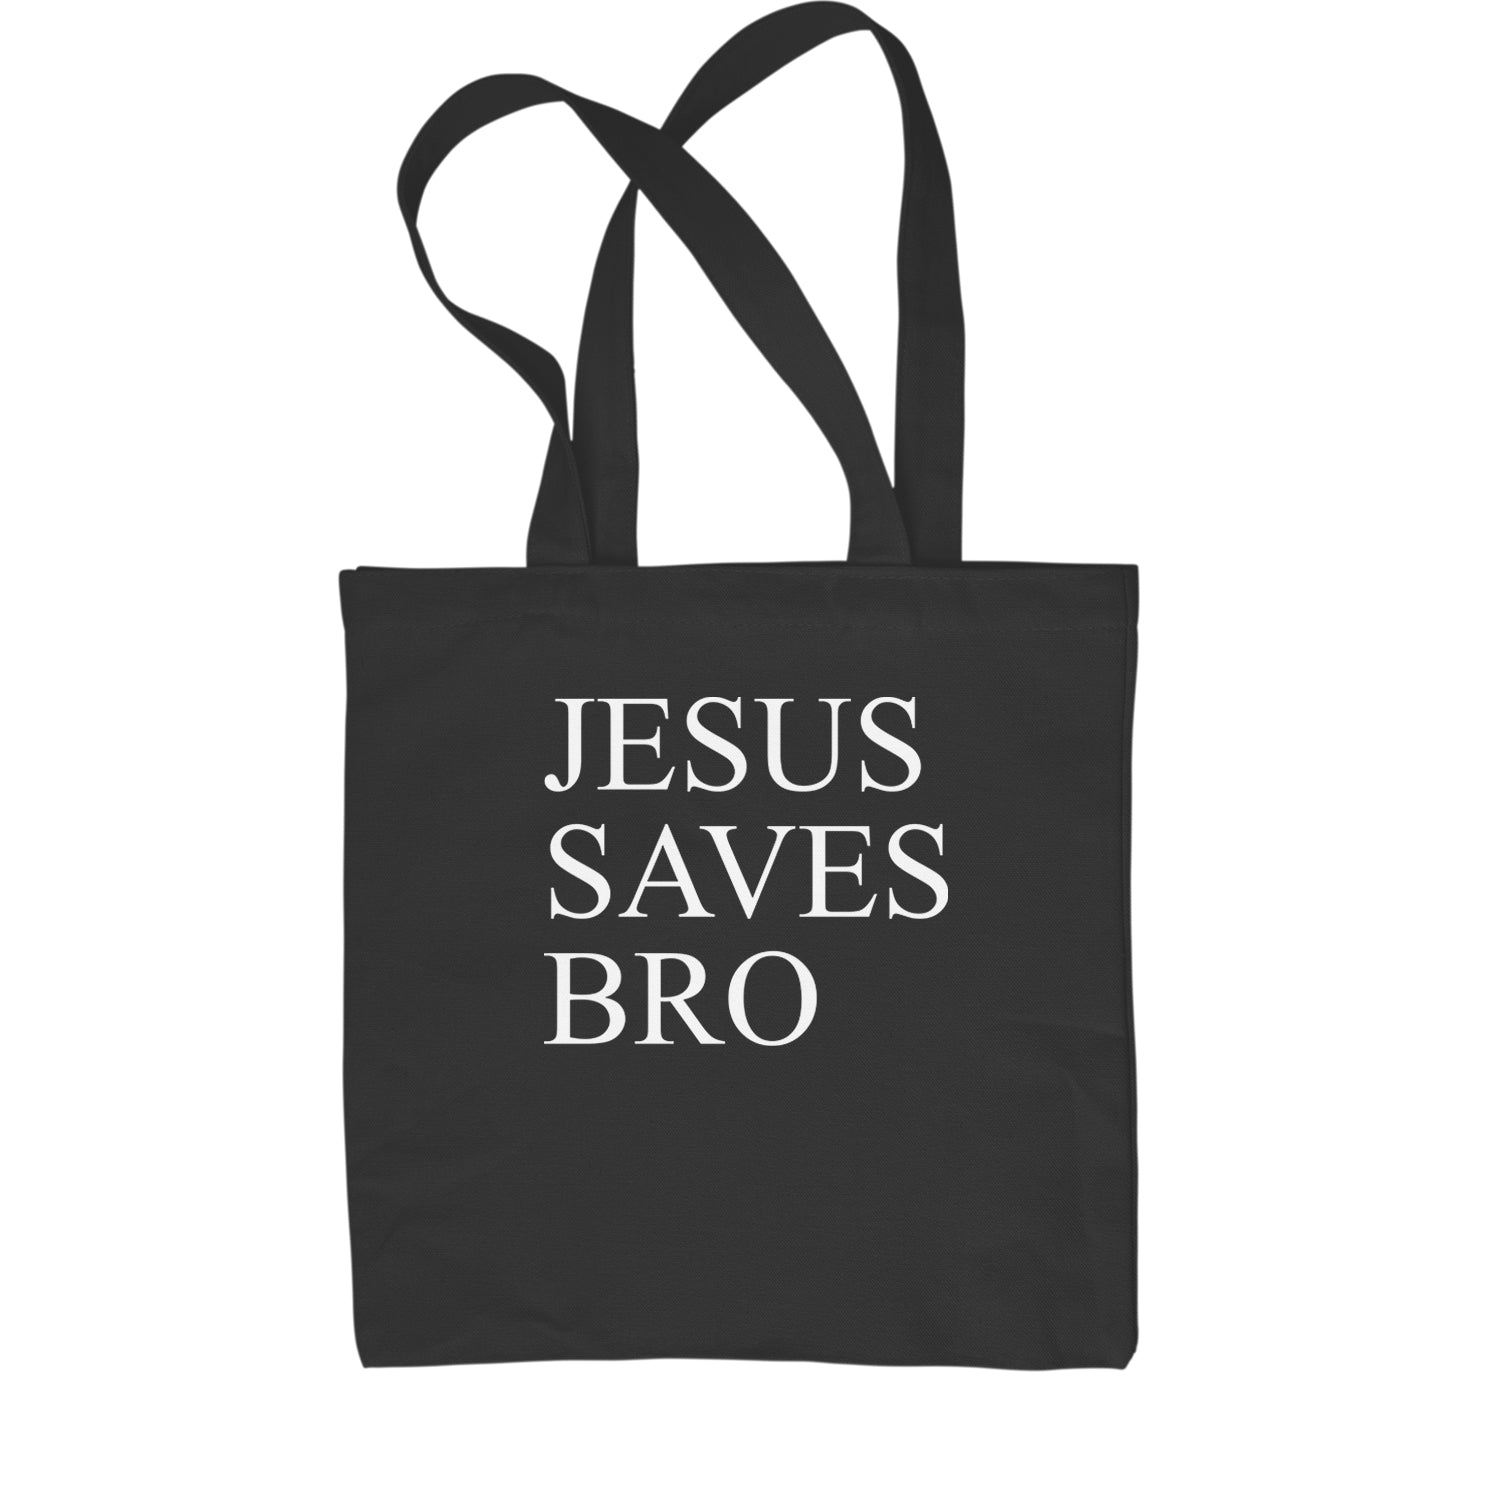 Jesus Saves Bro Shopping Tote Bag catholic, christian, christianity, church, jesus, religion, religuous by Expression Tees